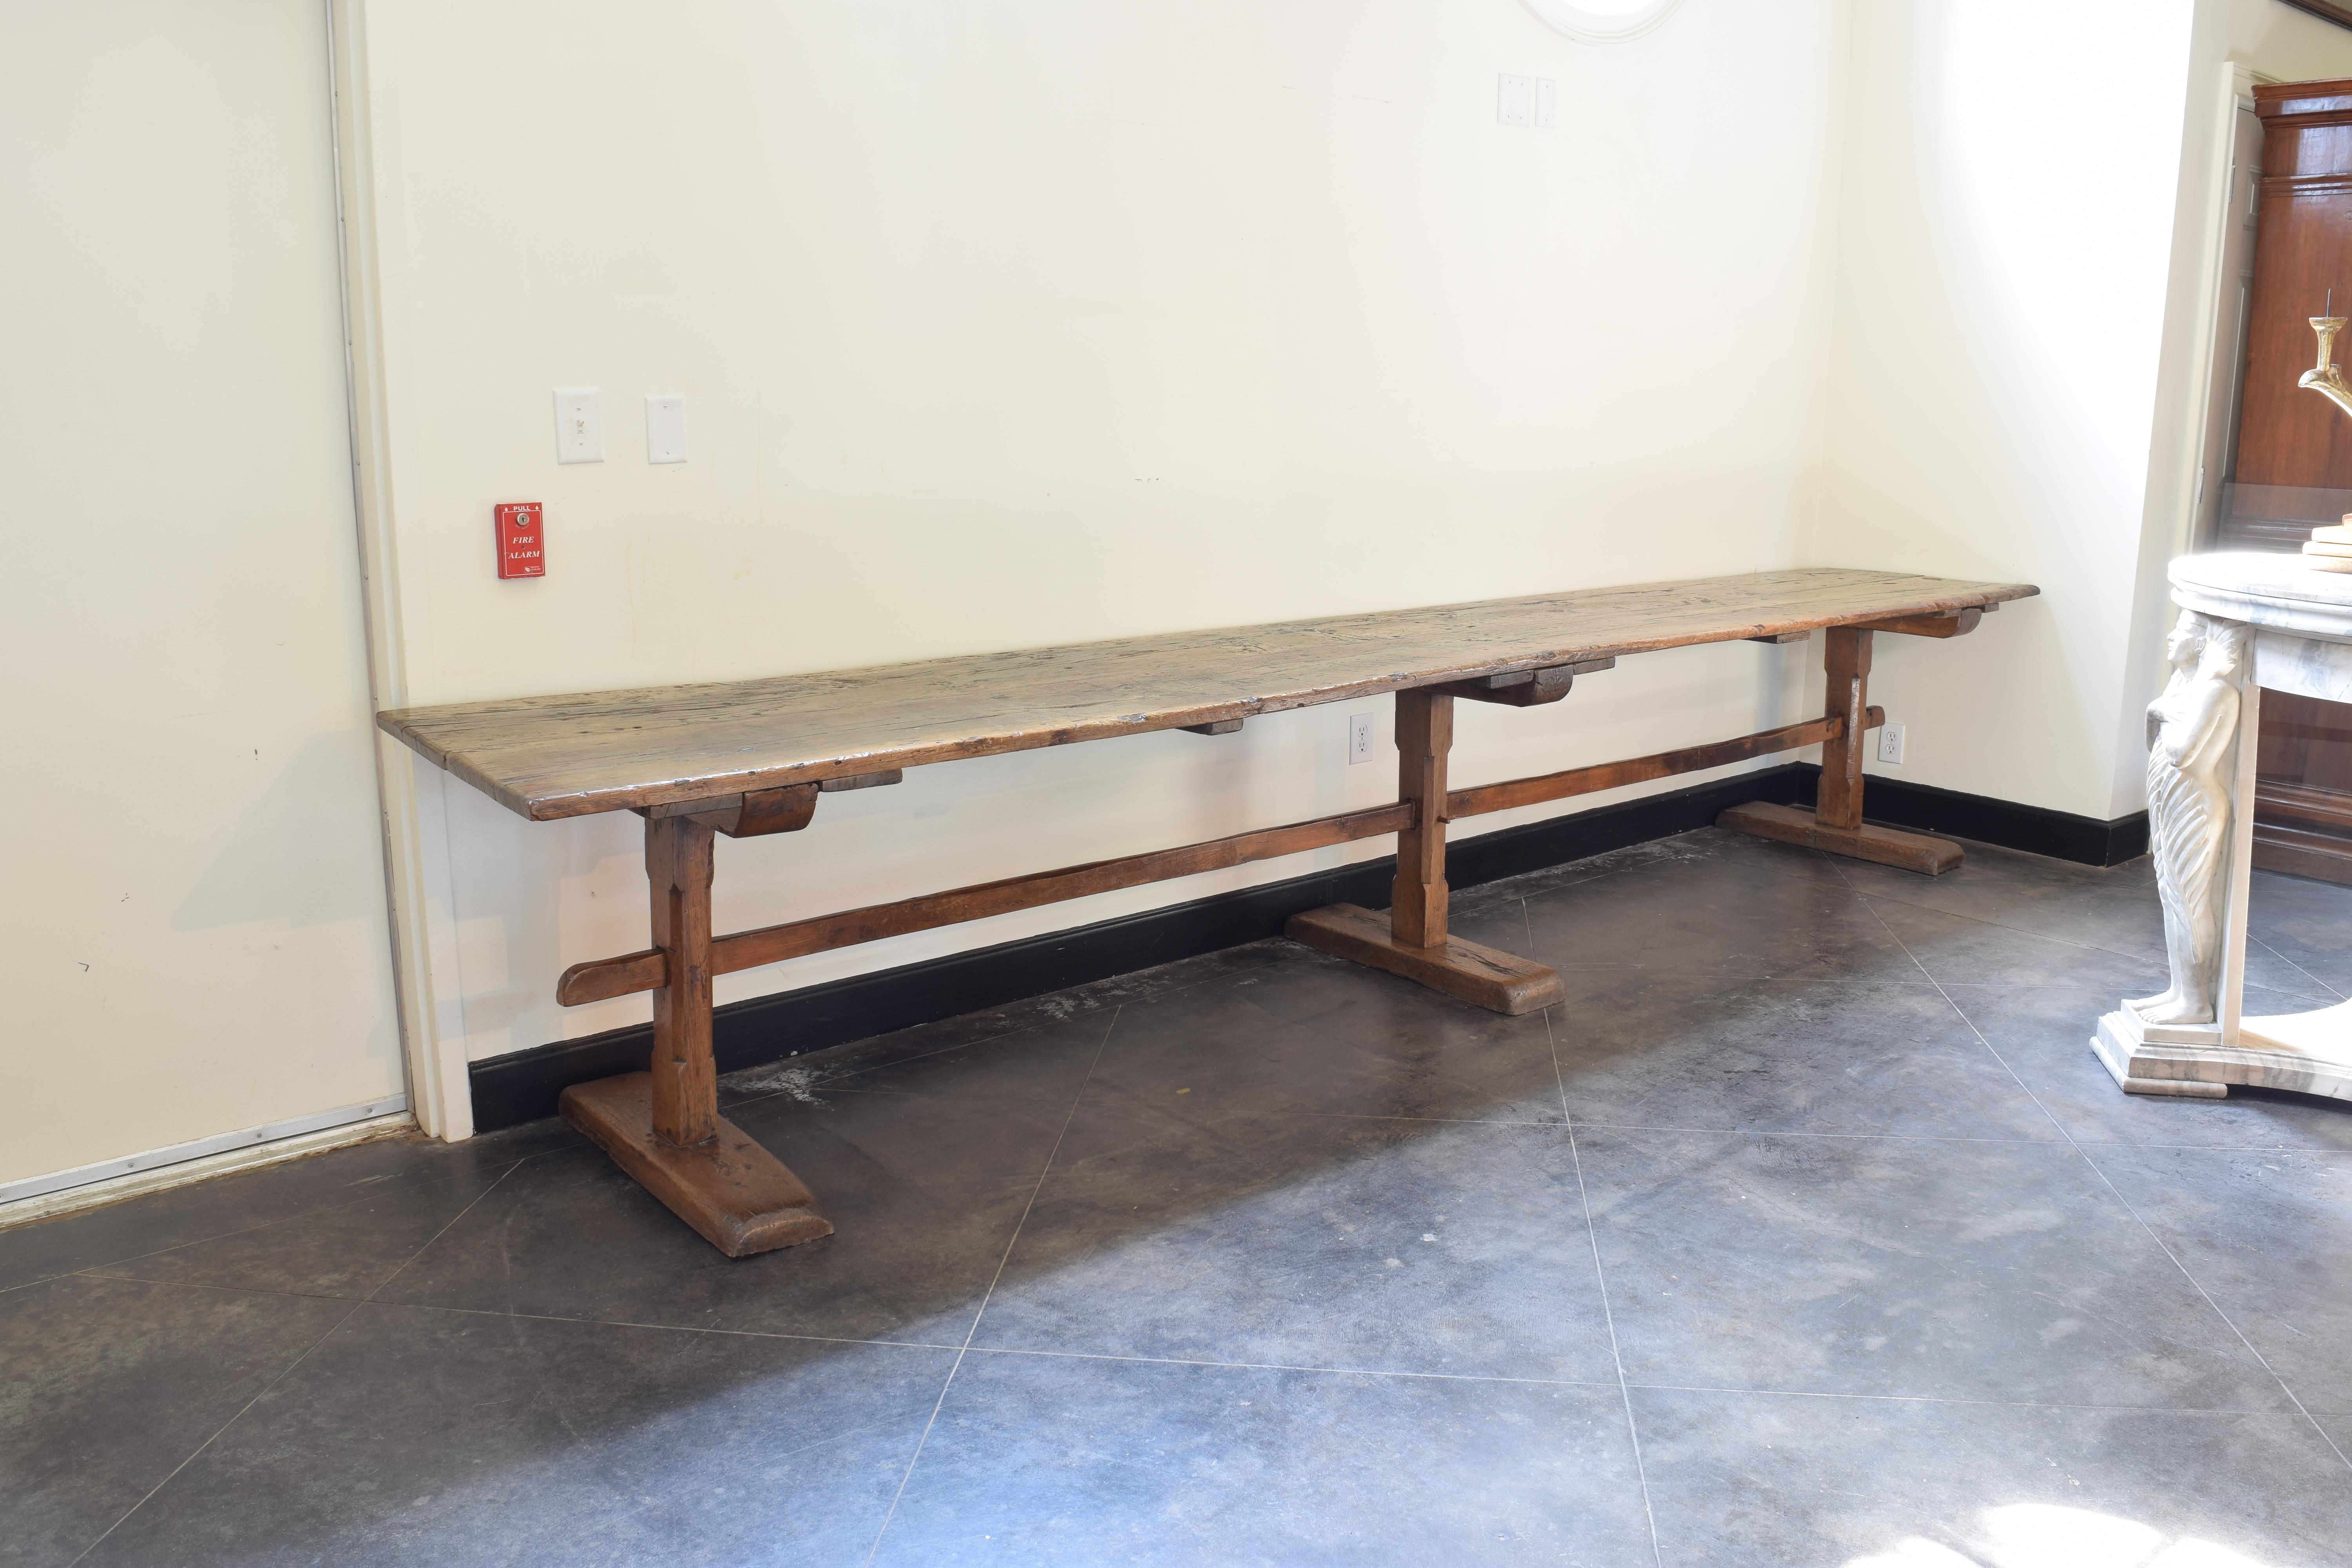 Made for and used in a monastic setting for dining, this table is constructed from two massive wooden planks resting atop three trestles with canted carvings and large bracket feet, the stretcher piercing throught each trestle for stability, in